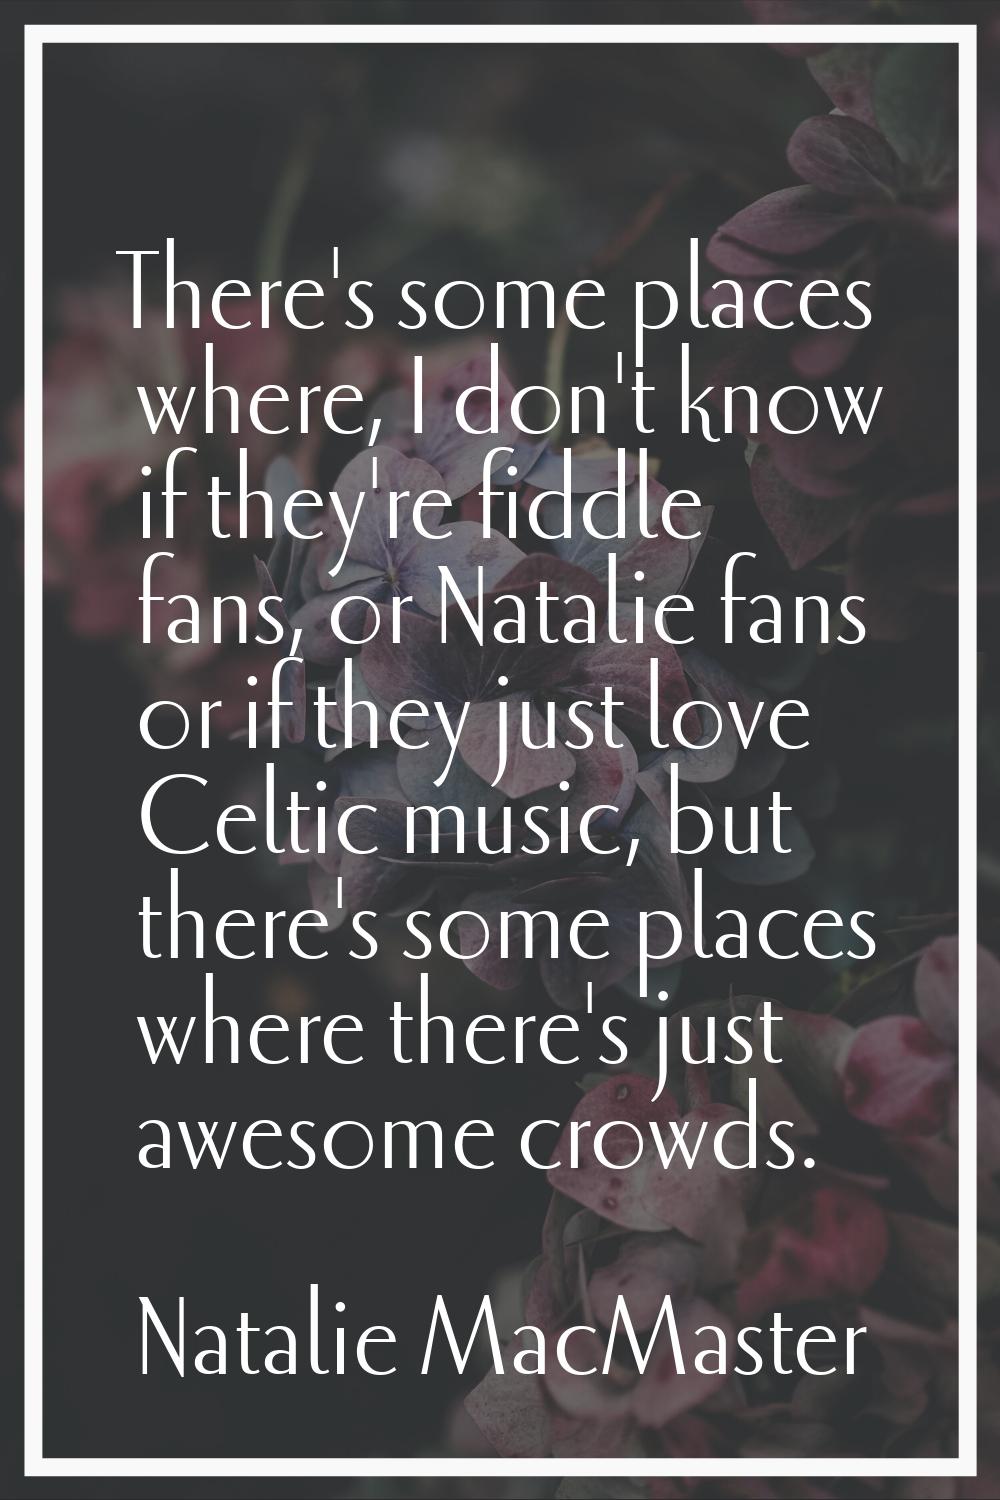 There's some places where, I don't know if they're fiddle fans, or Natalie fans or if they just lov